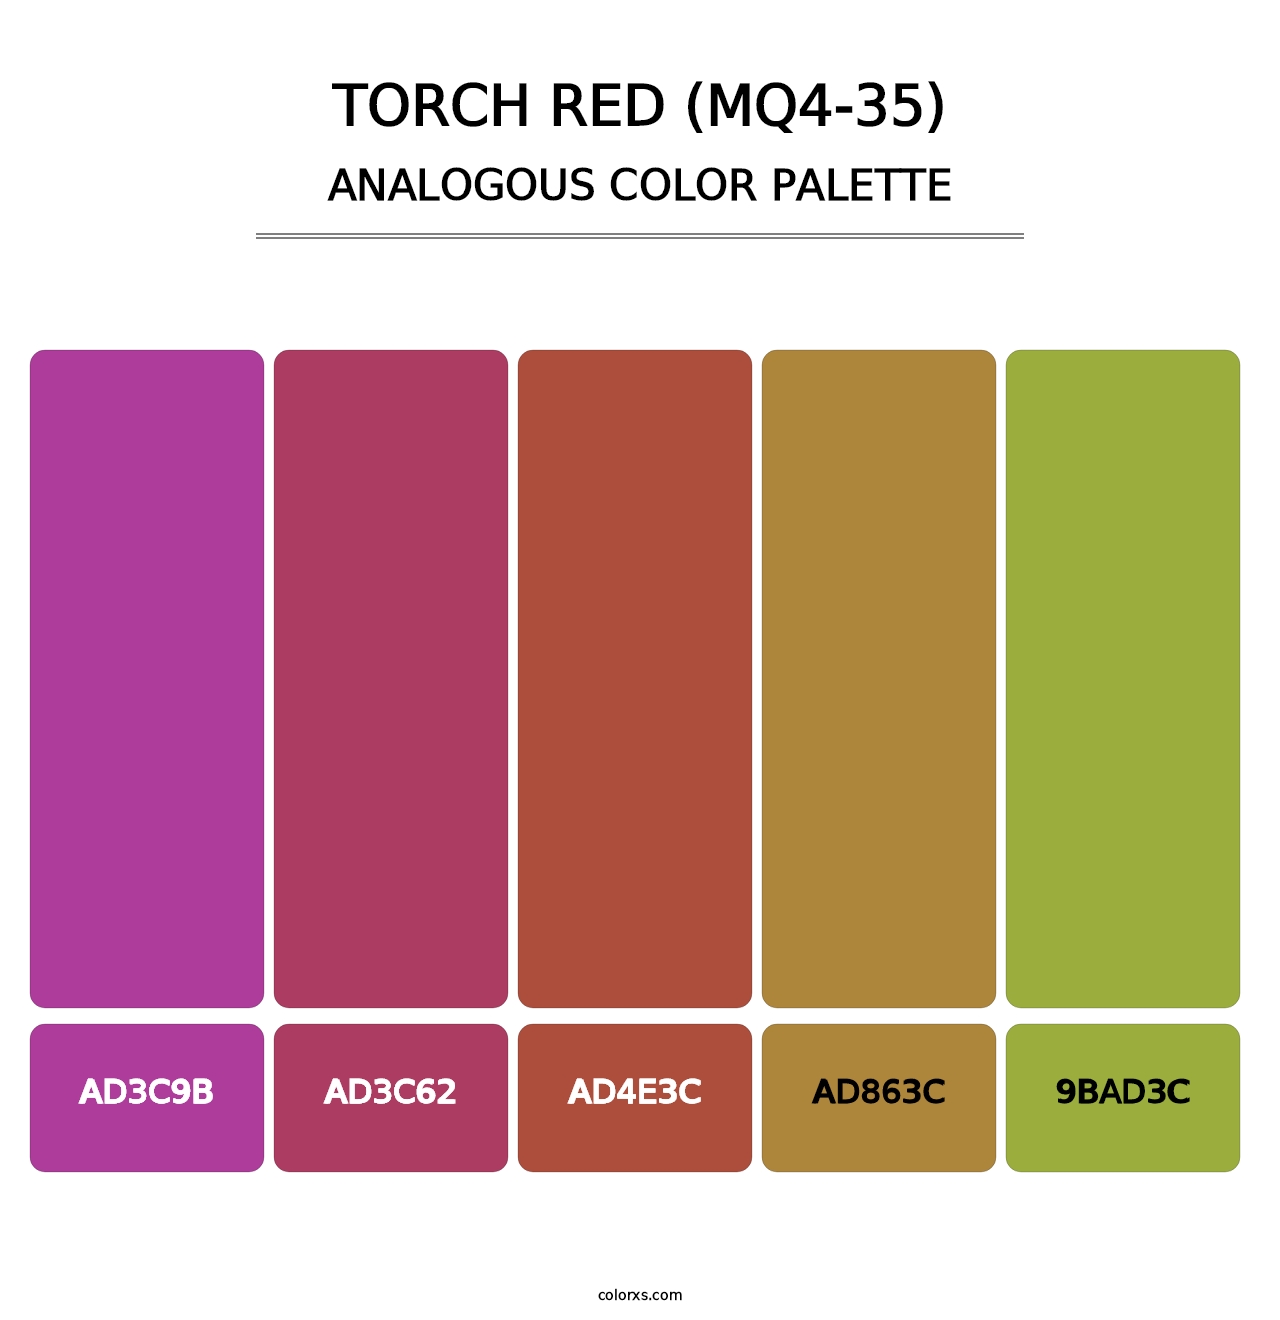 Torch Red (MQ4-35) - Analogous Color Palette